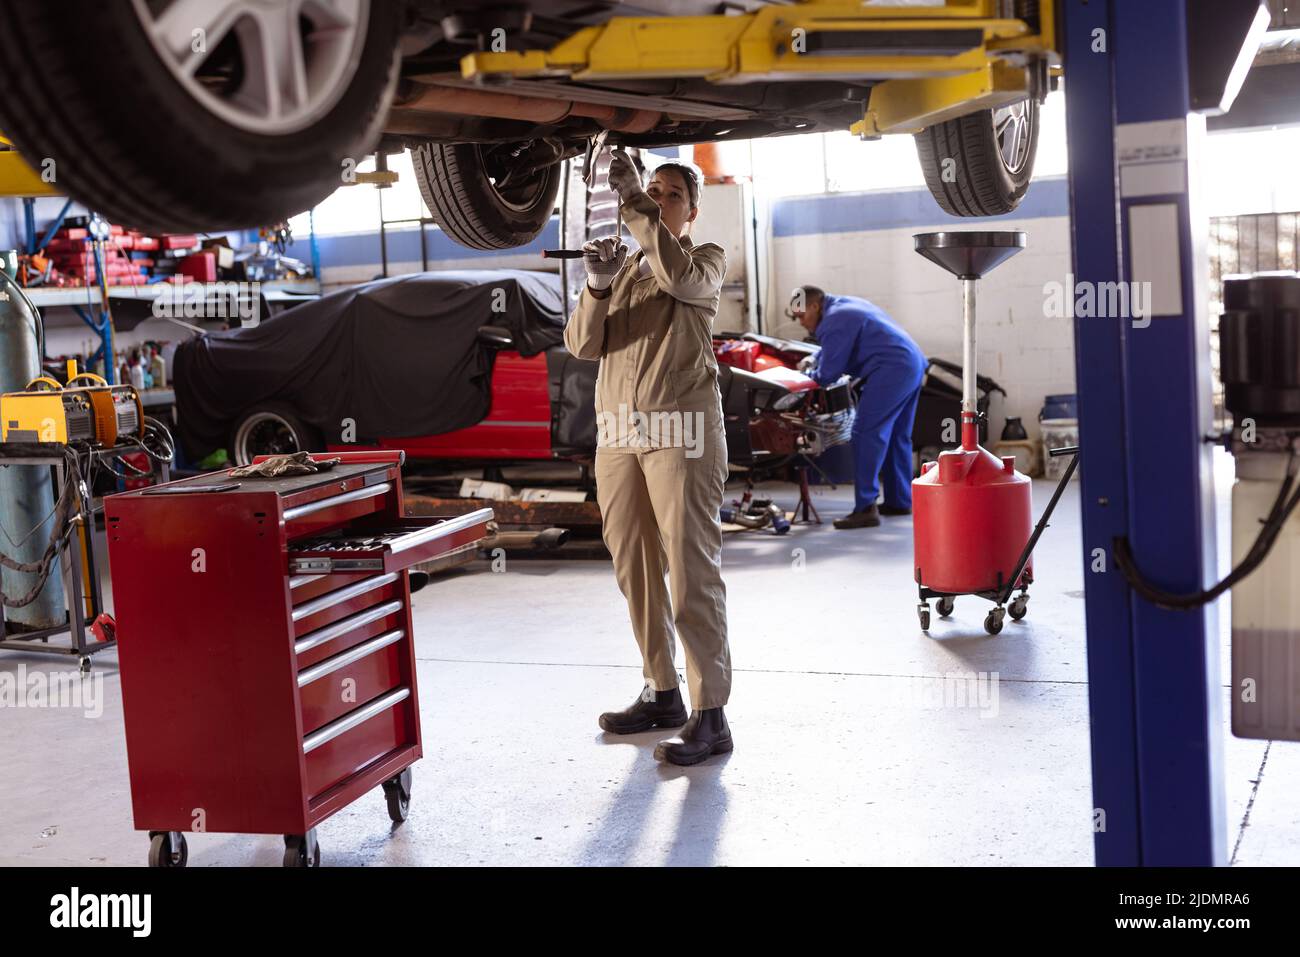 Mid adult female asian welder repairing car on lift in workshop, copy space Stock Photo